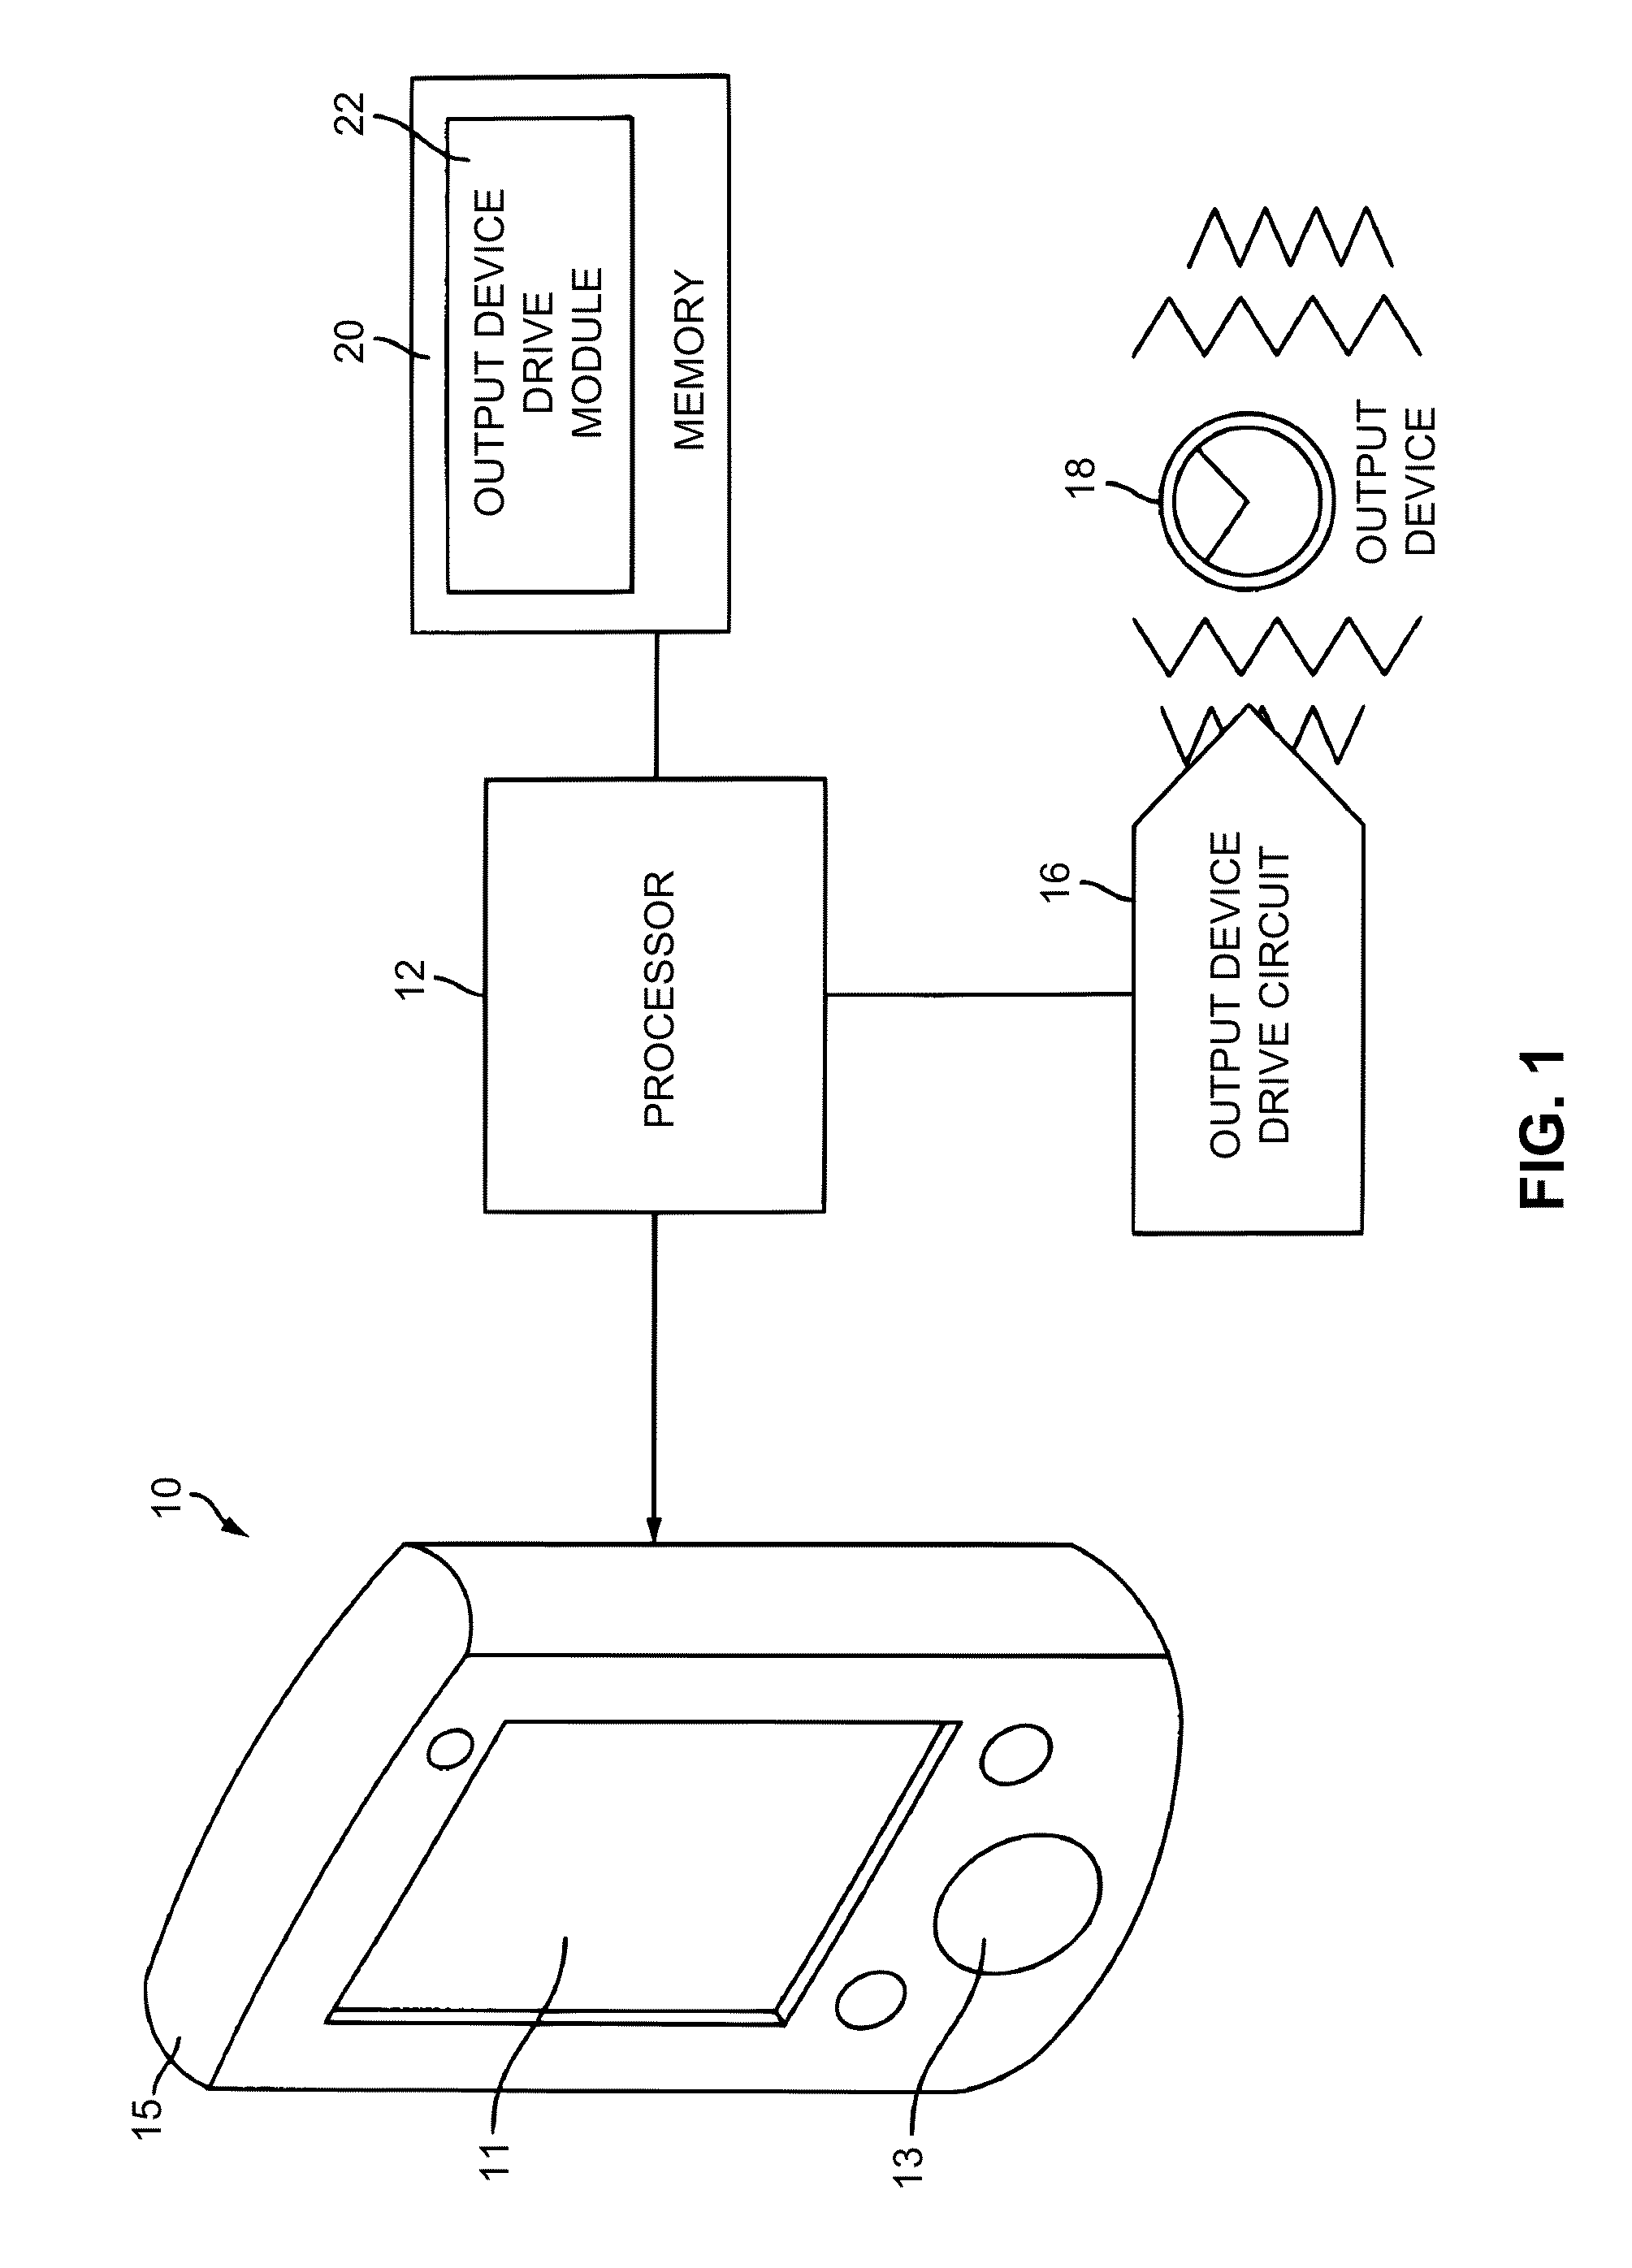 System and method for display of multiple data channels on a single haptic display